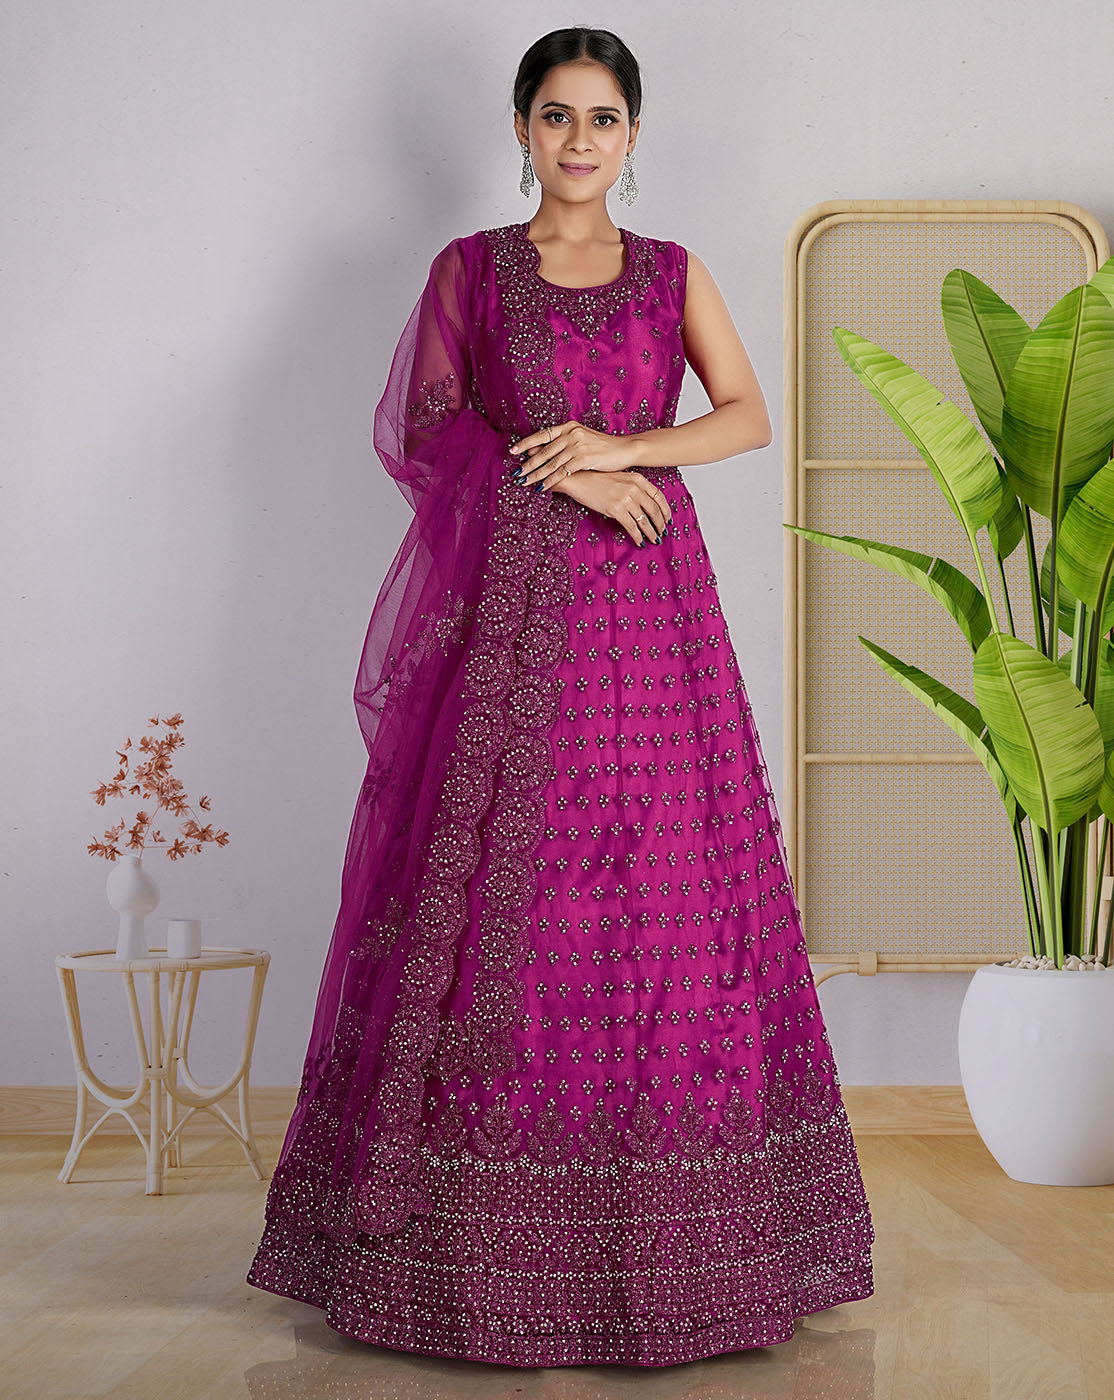 Heavy Net Dress with Embroidery work at Rs.1251/1 in surat offer by Clemira